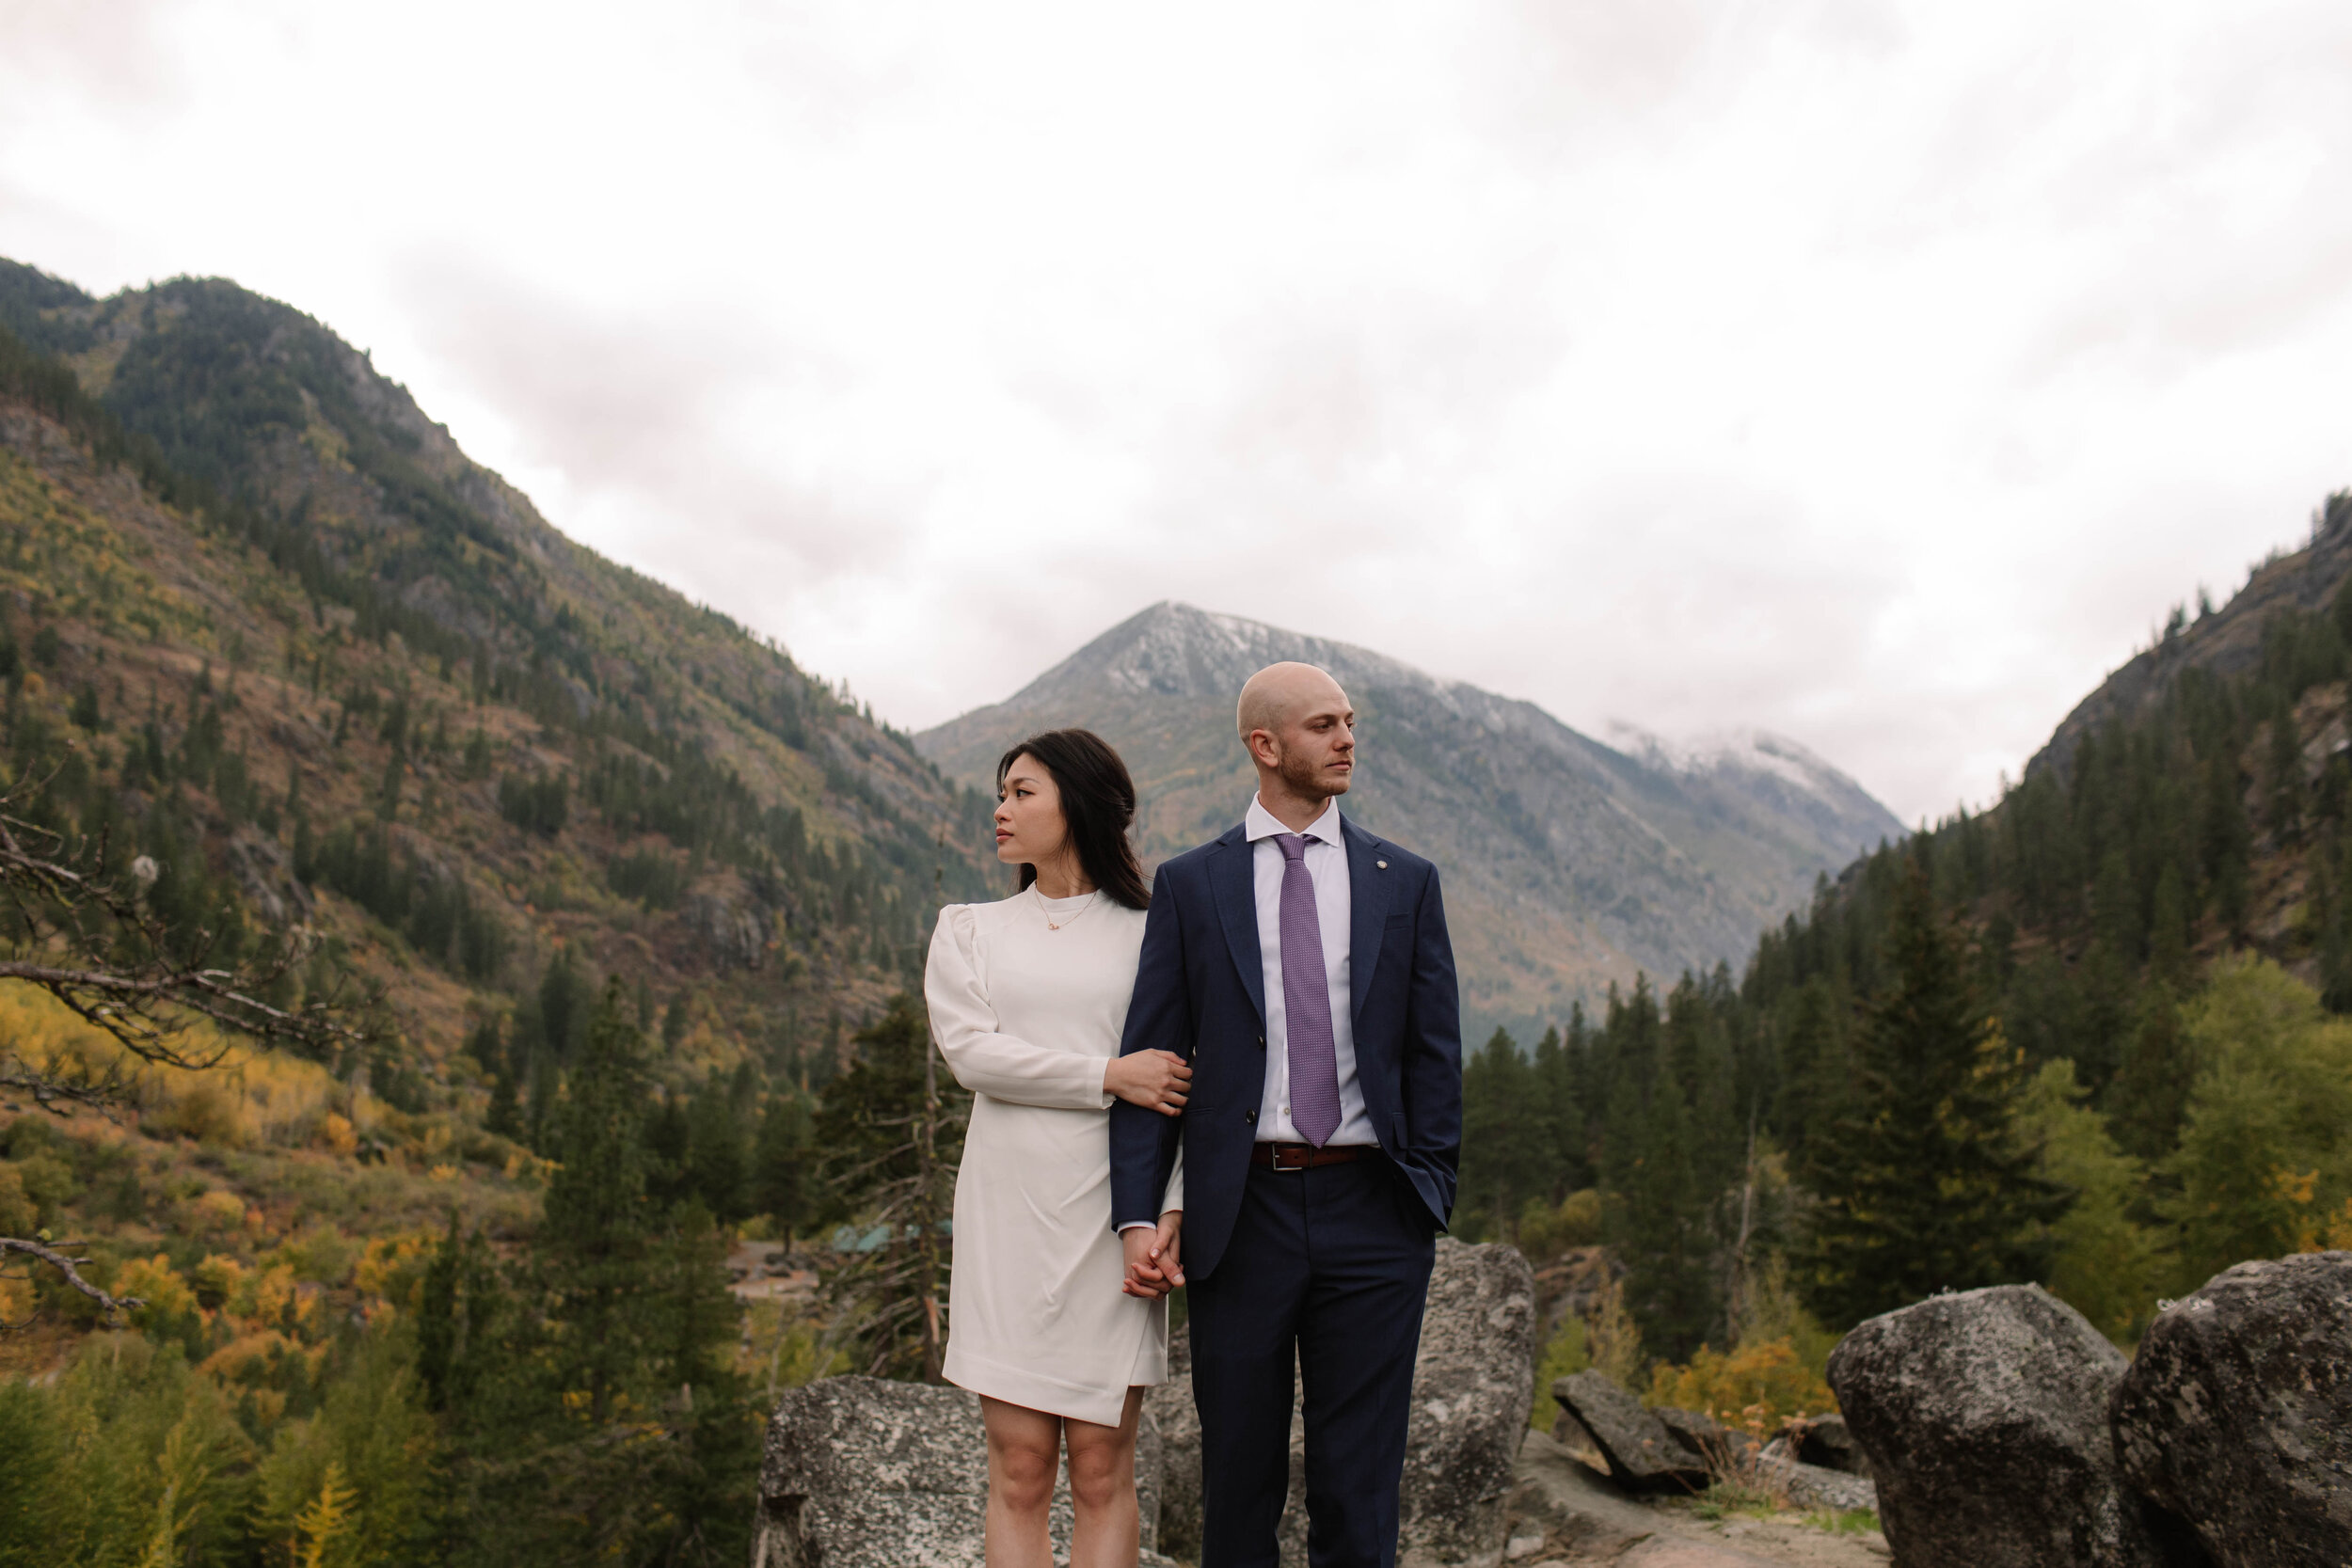 socal-san-diego-southern-california-elopement-small-wedding-outdoor-forest-mountains-waterfall-ceremony-leavenworth-washington-photographer-47.jpg